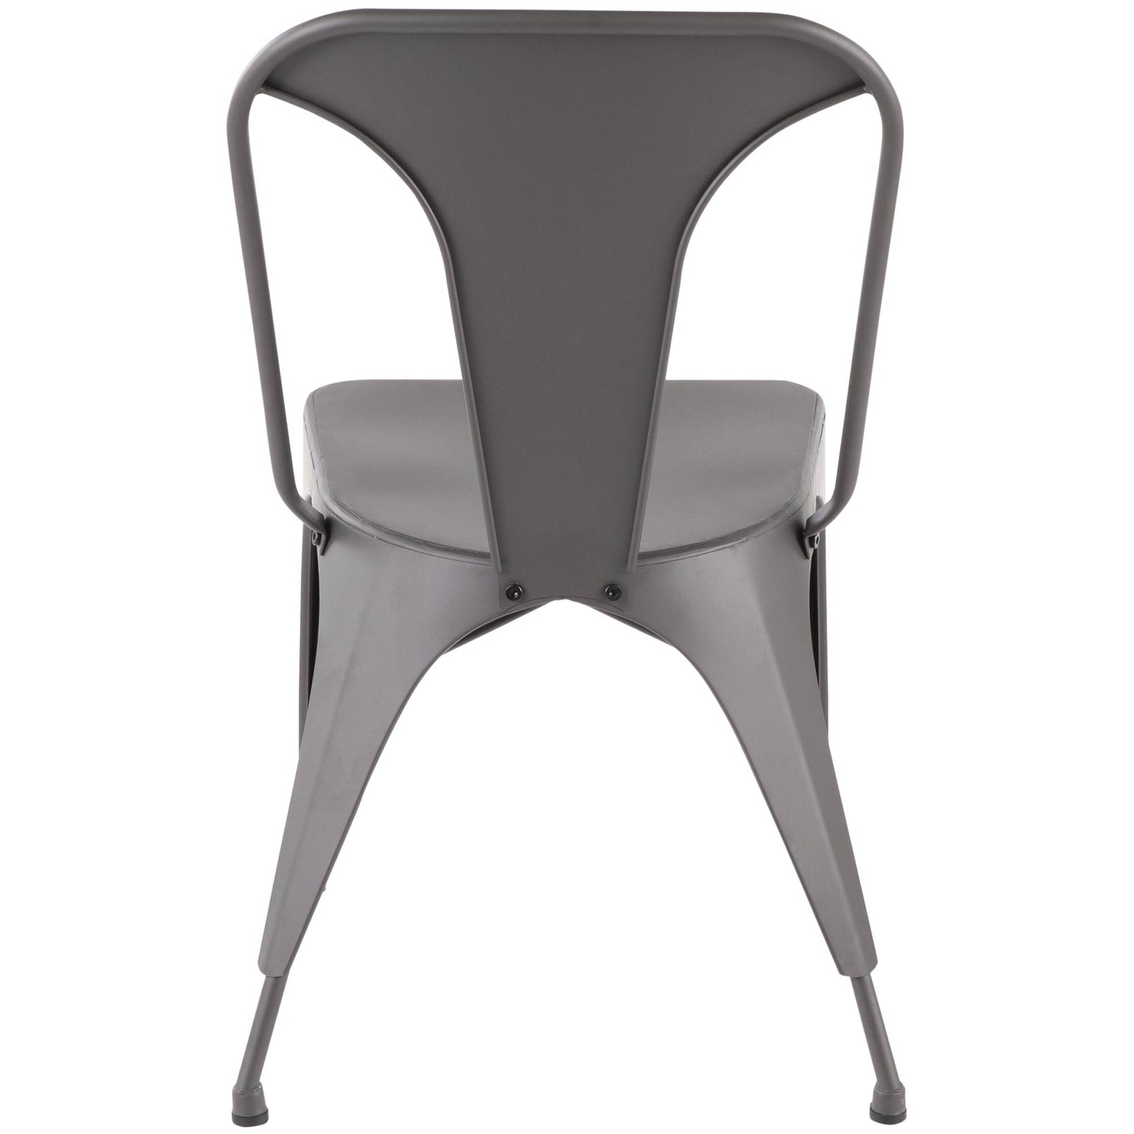 LumiSource Austin Dining Chair - Image 3 of 3